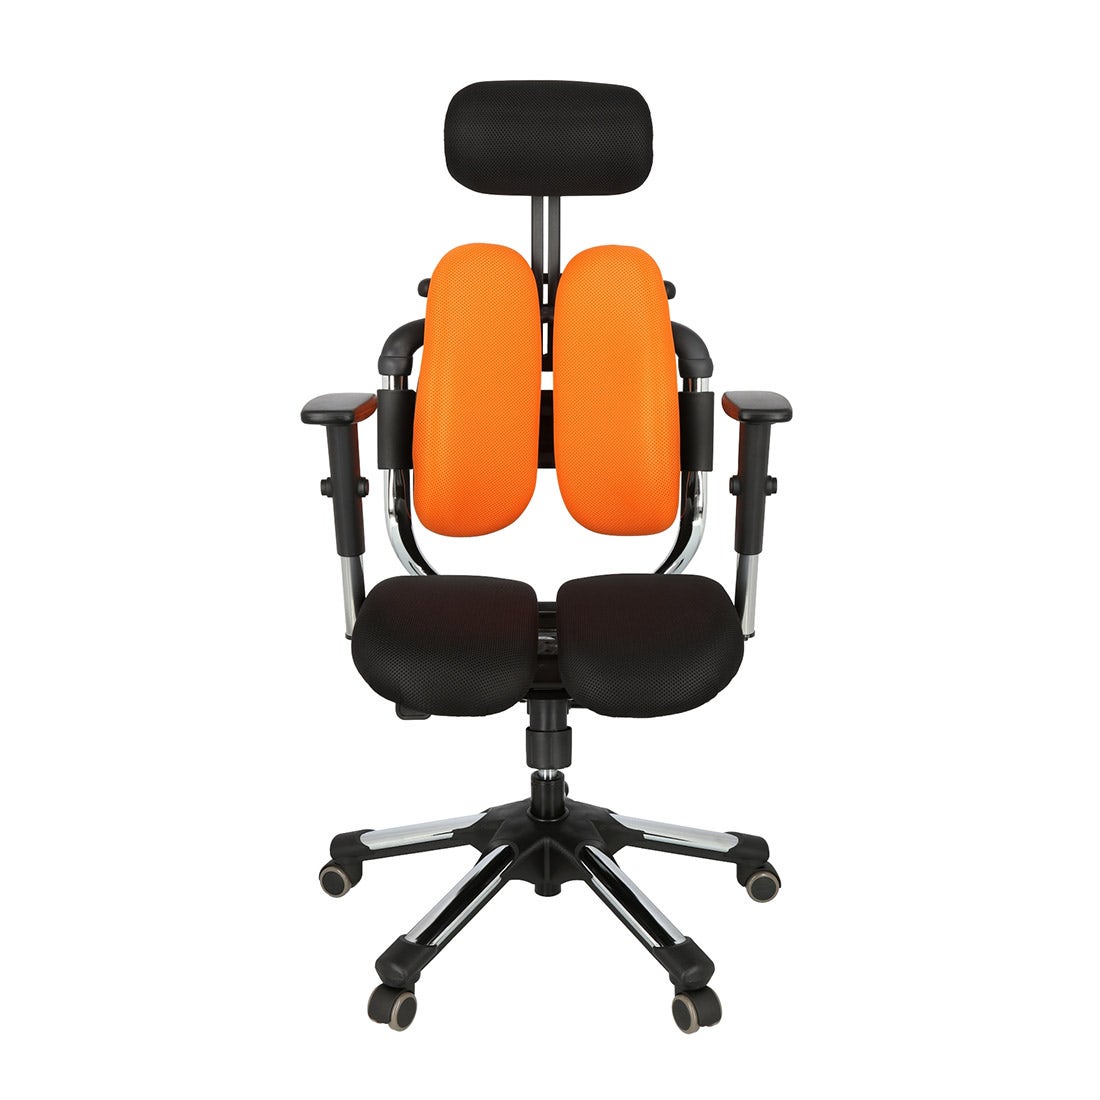 39014936-furniture-home-office-gaming-office-chair-01